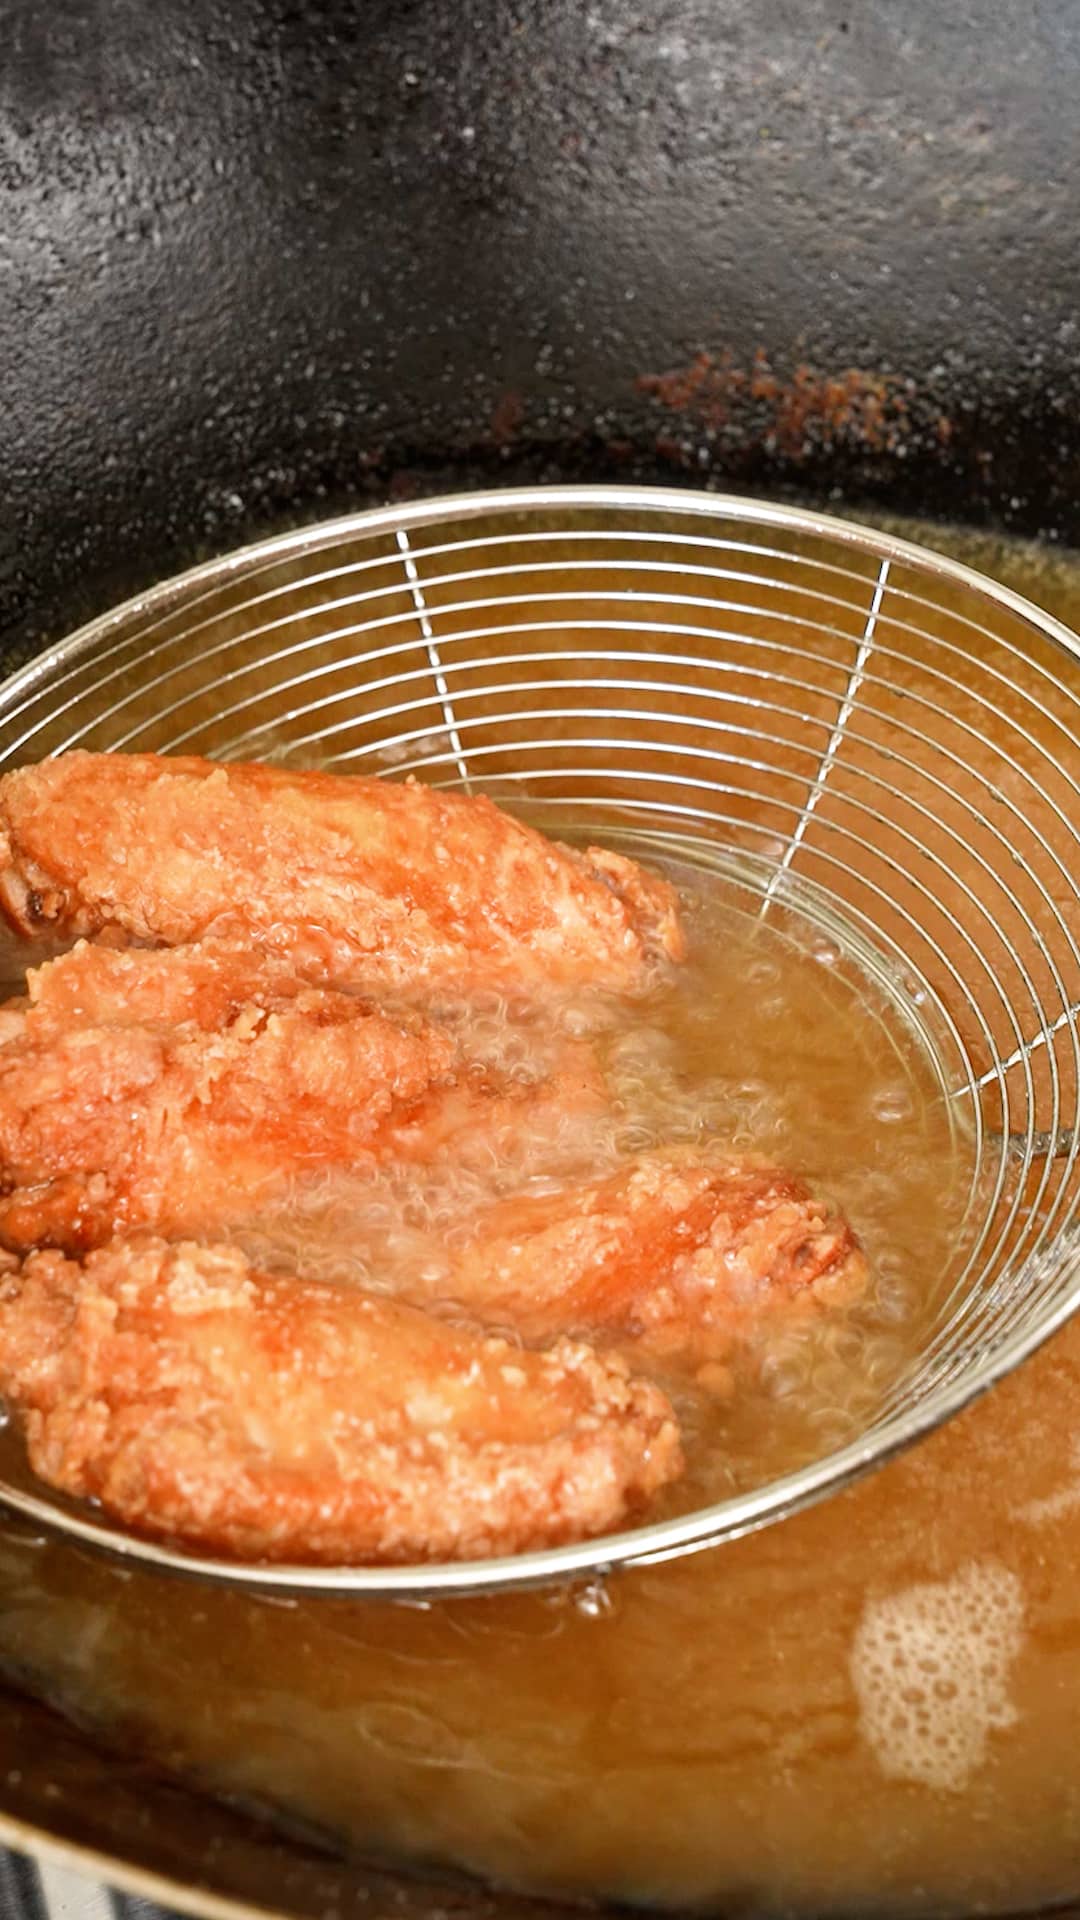 Fried chicken wings being removed from hot oil.